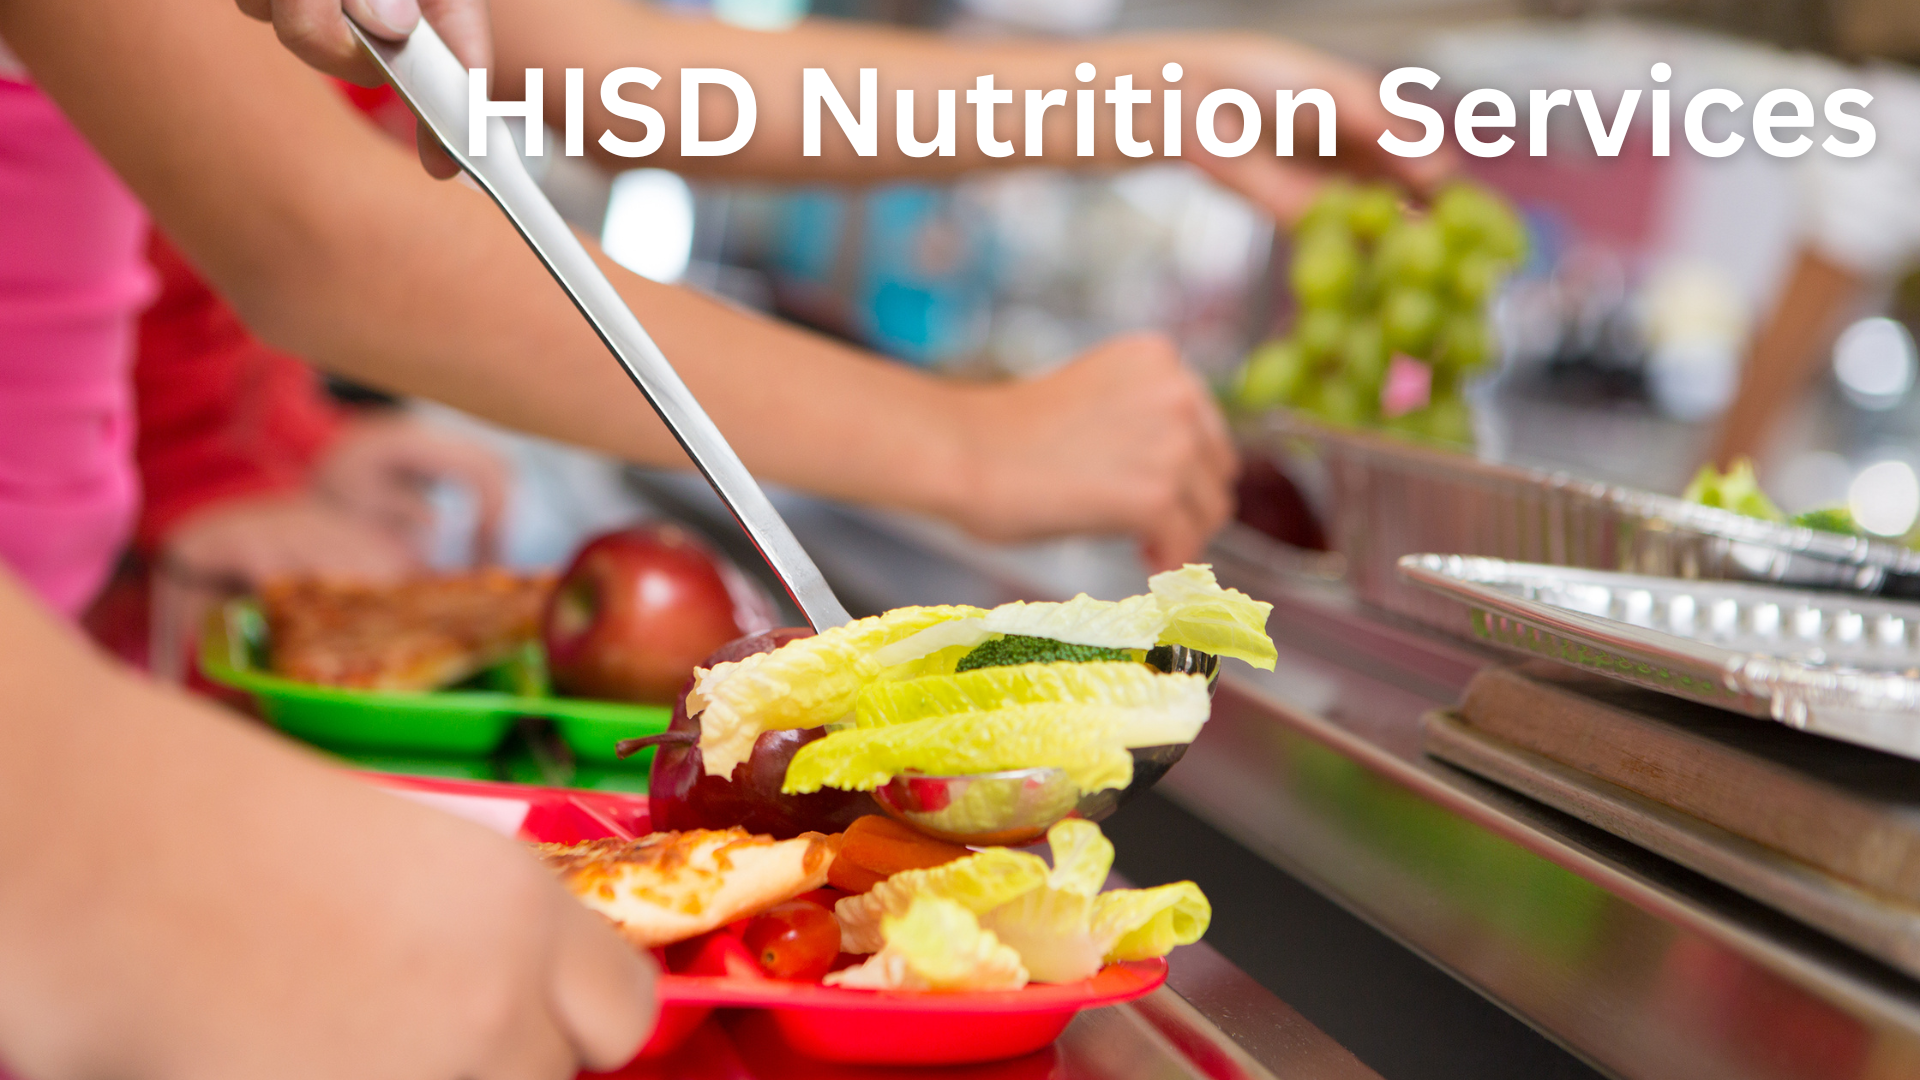 HISD Nutrition Services